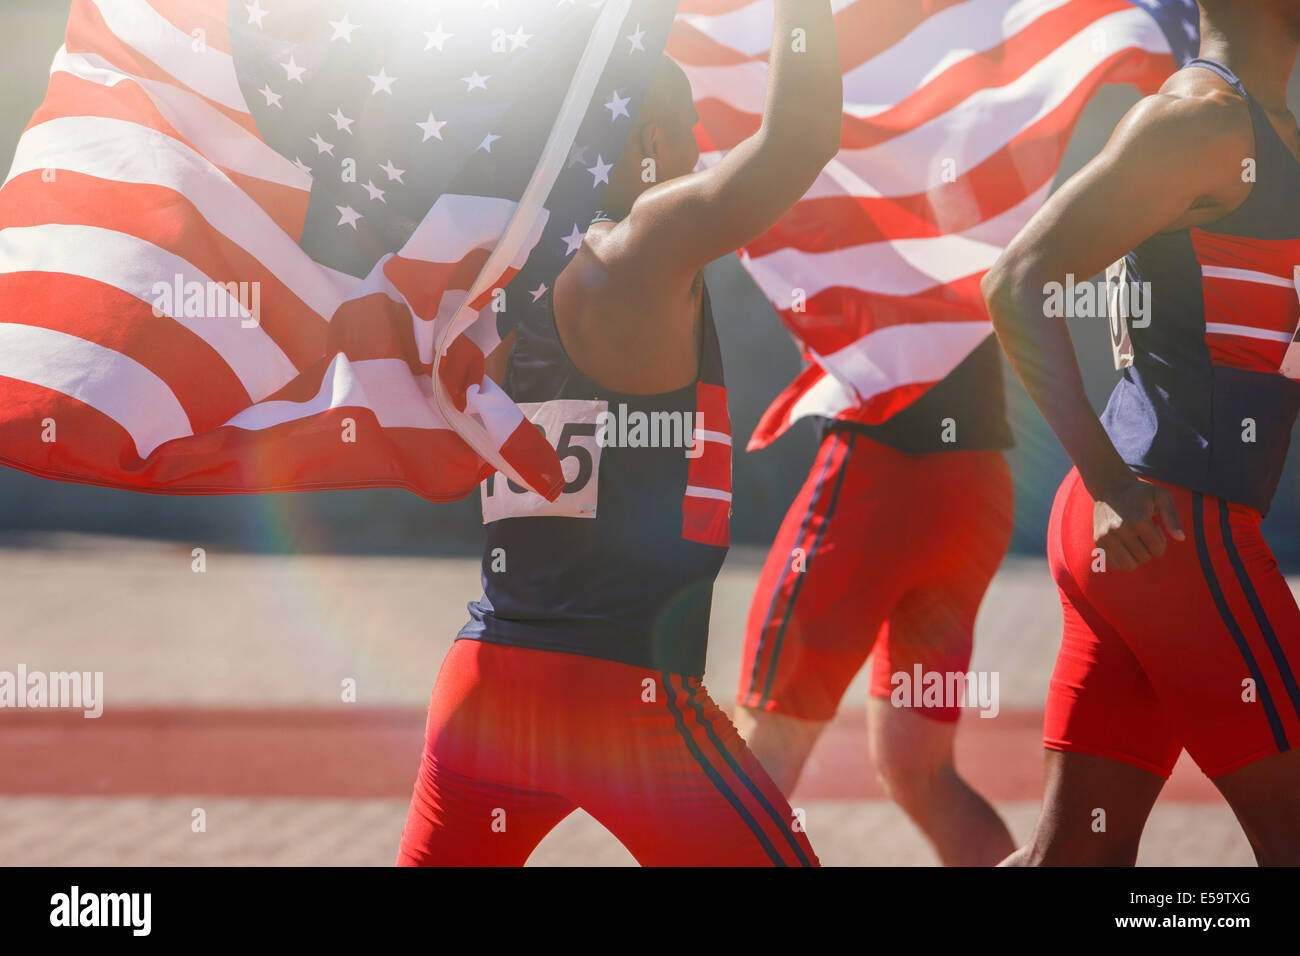 Track and field athletes holding American flags on track Stock Photo